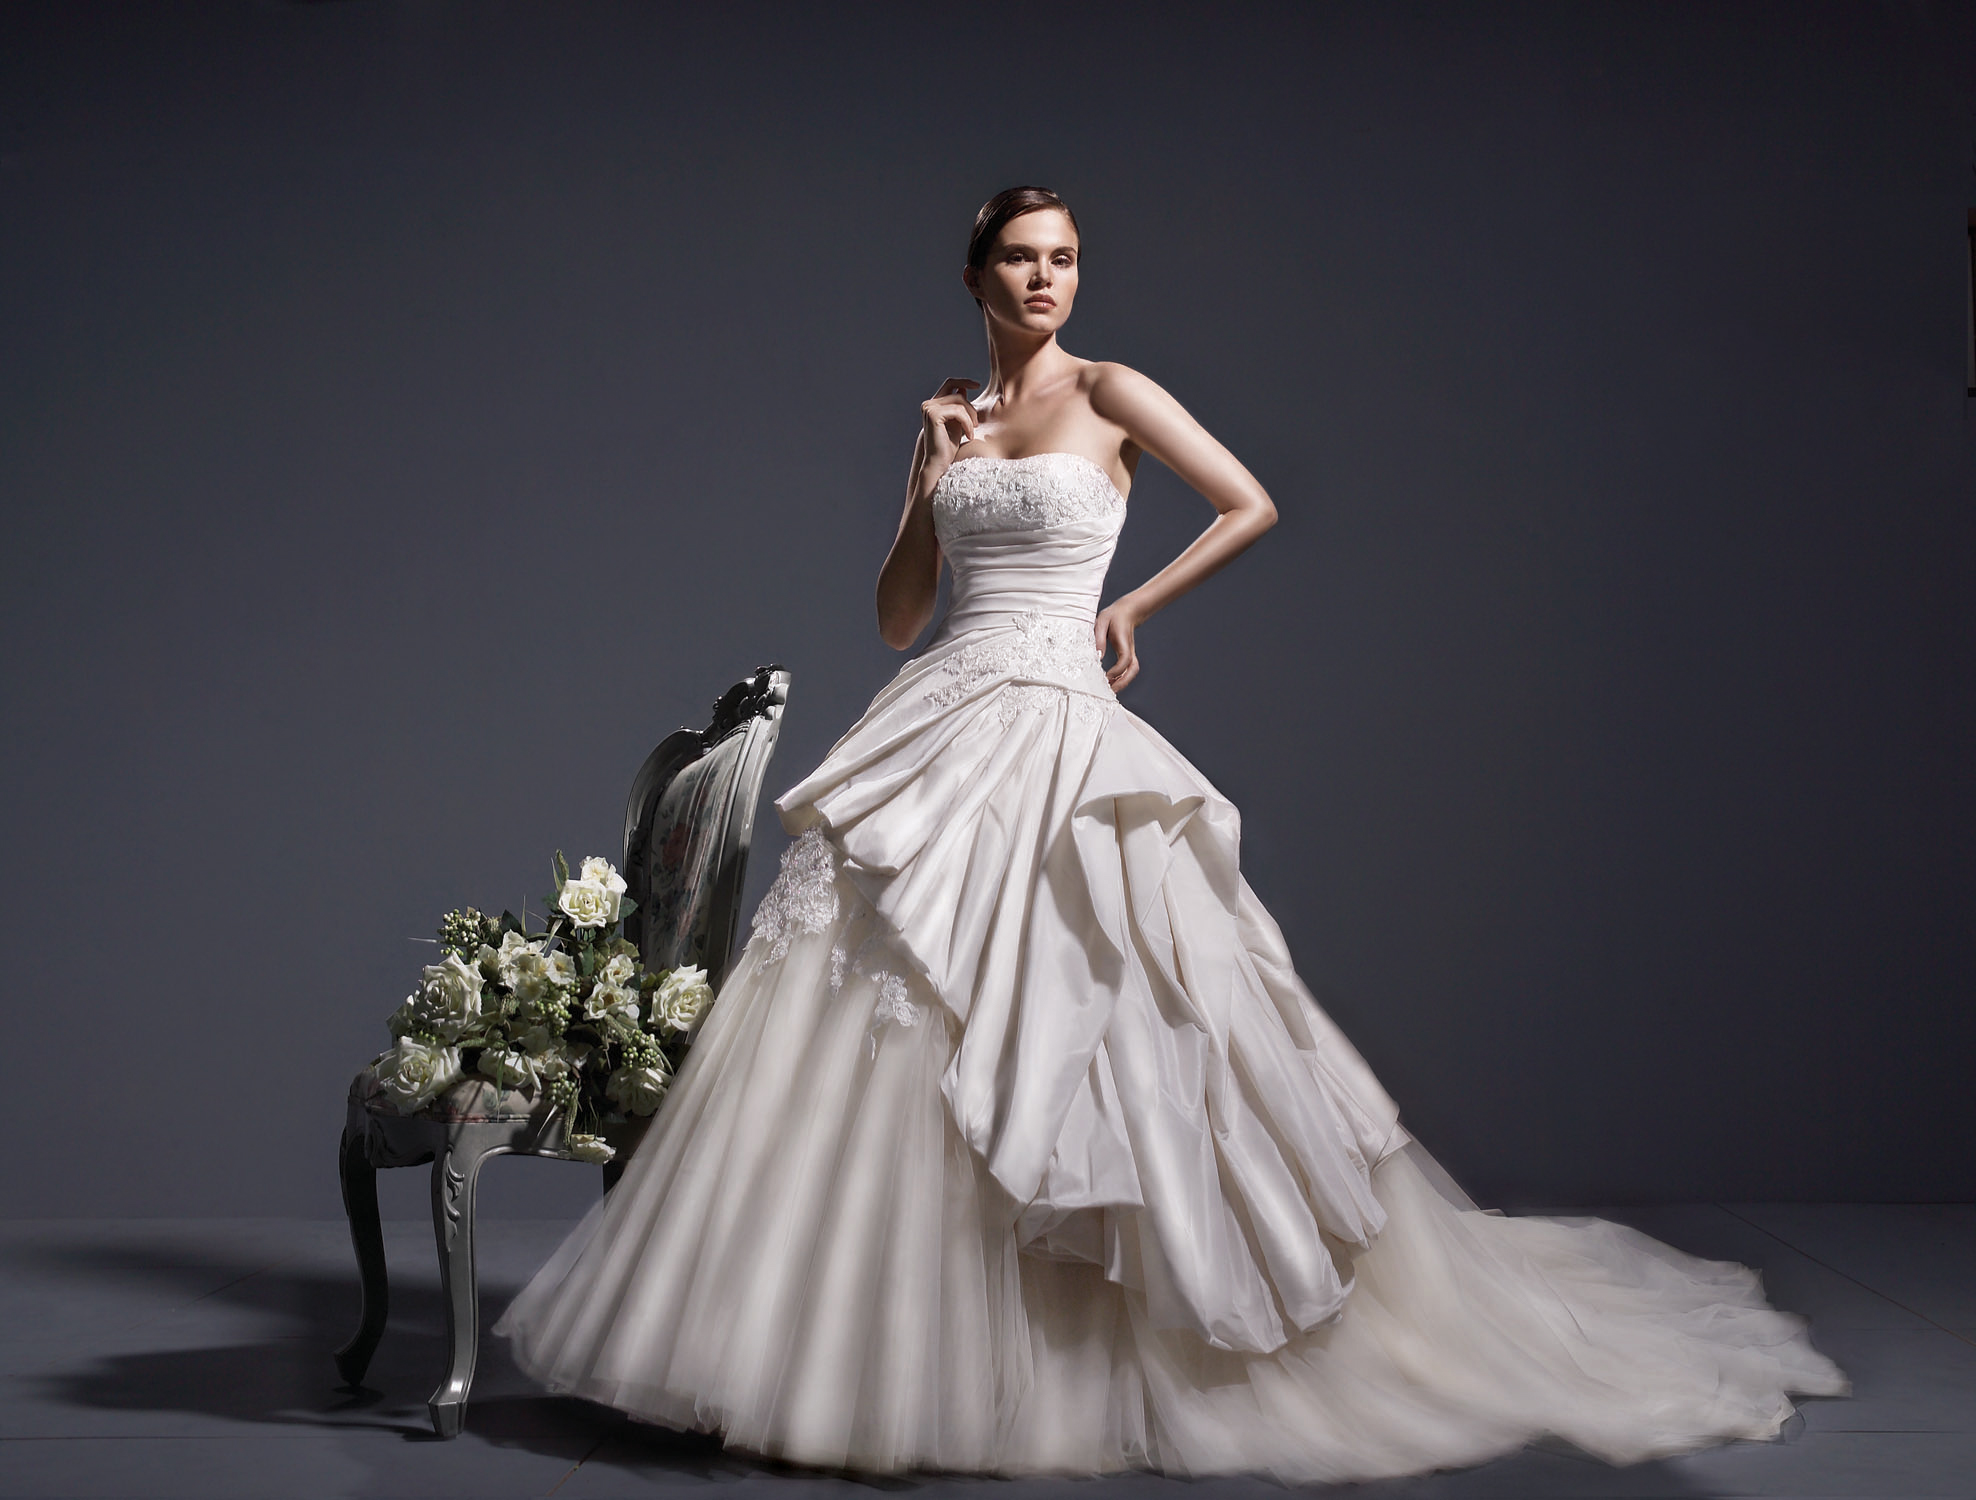 At Thi Thao Copenhagen we make gala dresses and party dresses for a wide selection of different events ranging from Royal parties and Oscar celebrations to family garden weddings.